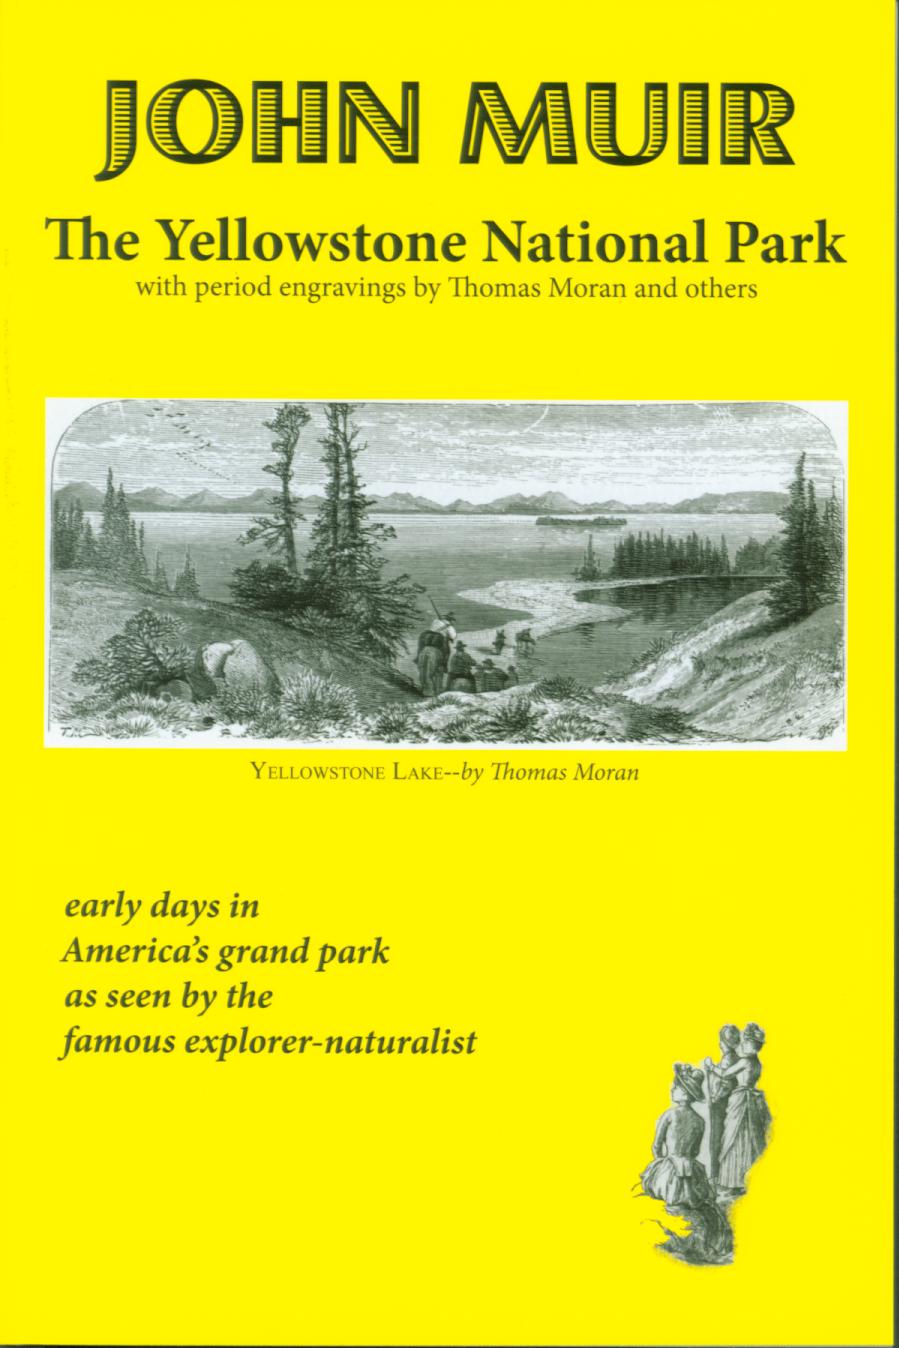 THE YELLOWSTONE NATIONAL PARK (ID/MT/WY)